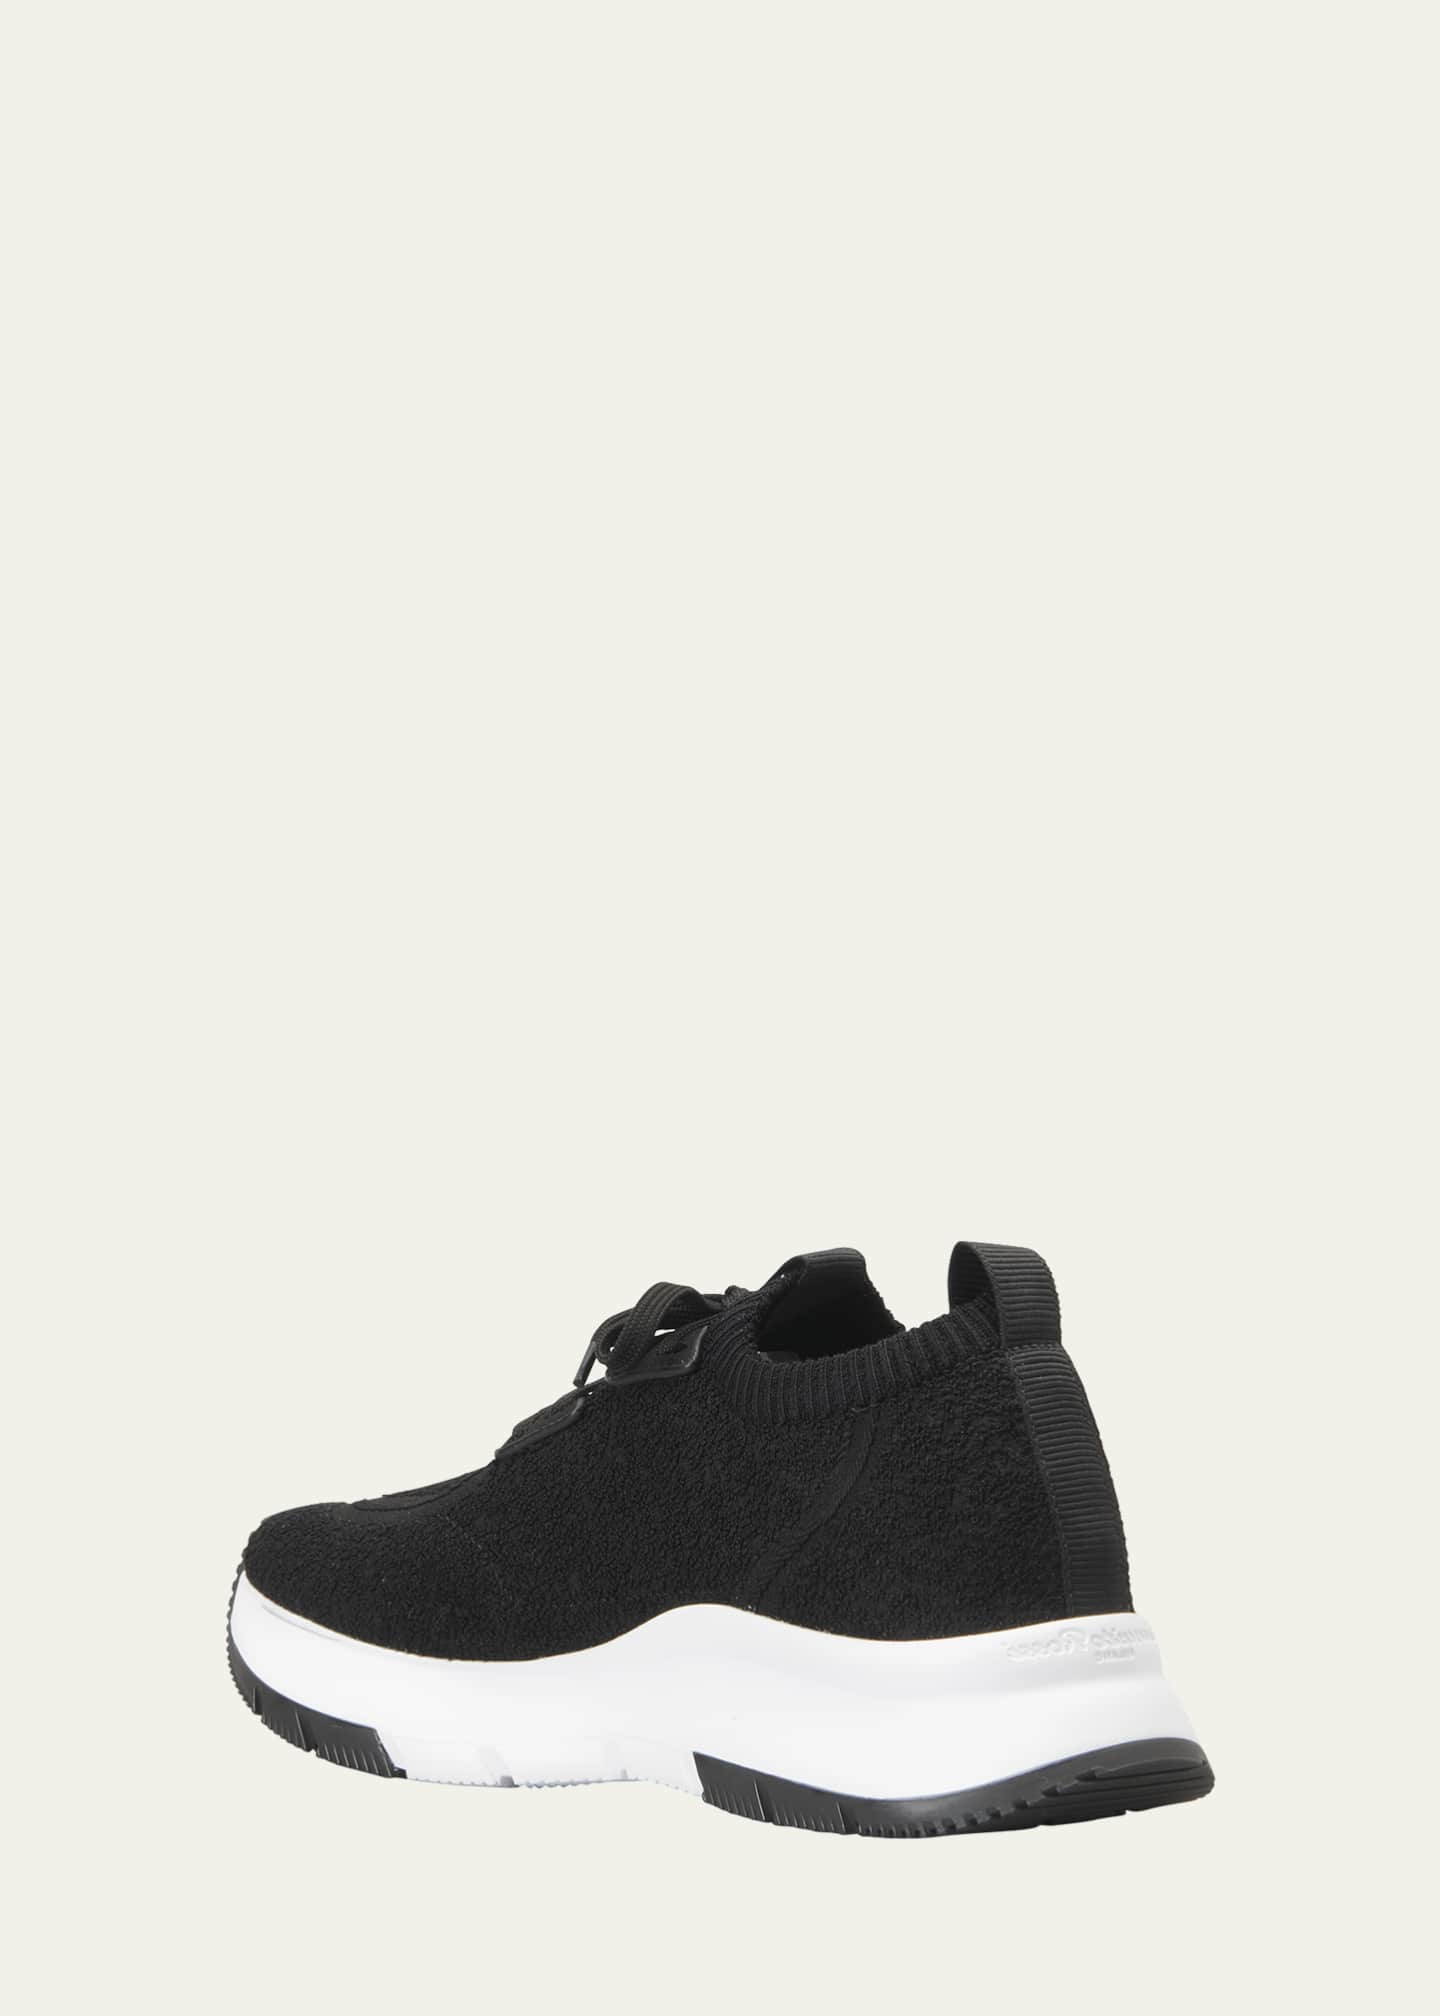 Gianvito Rossi Glover Knit Boucle Sneakers - Bergdorf Goodman